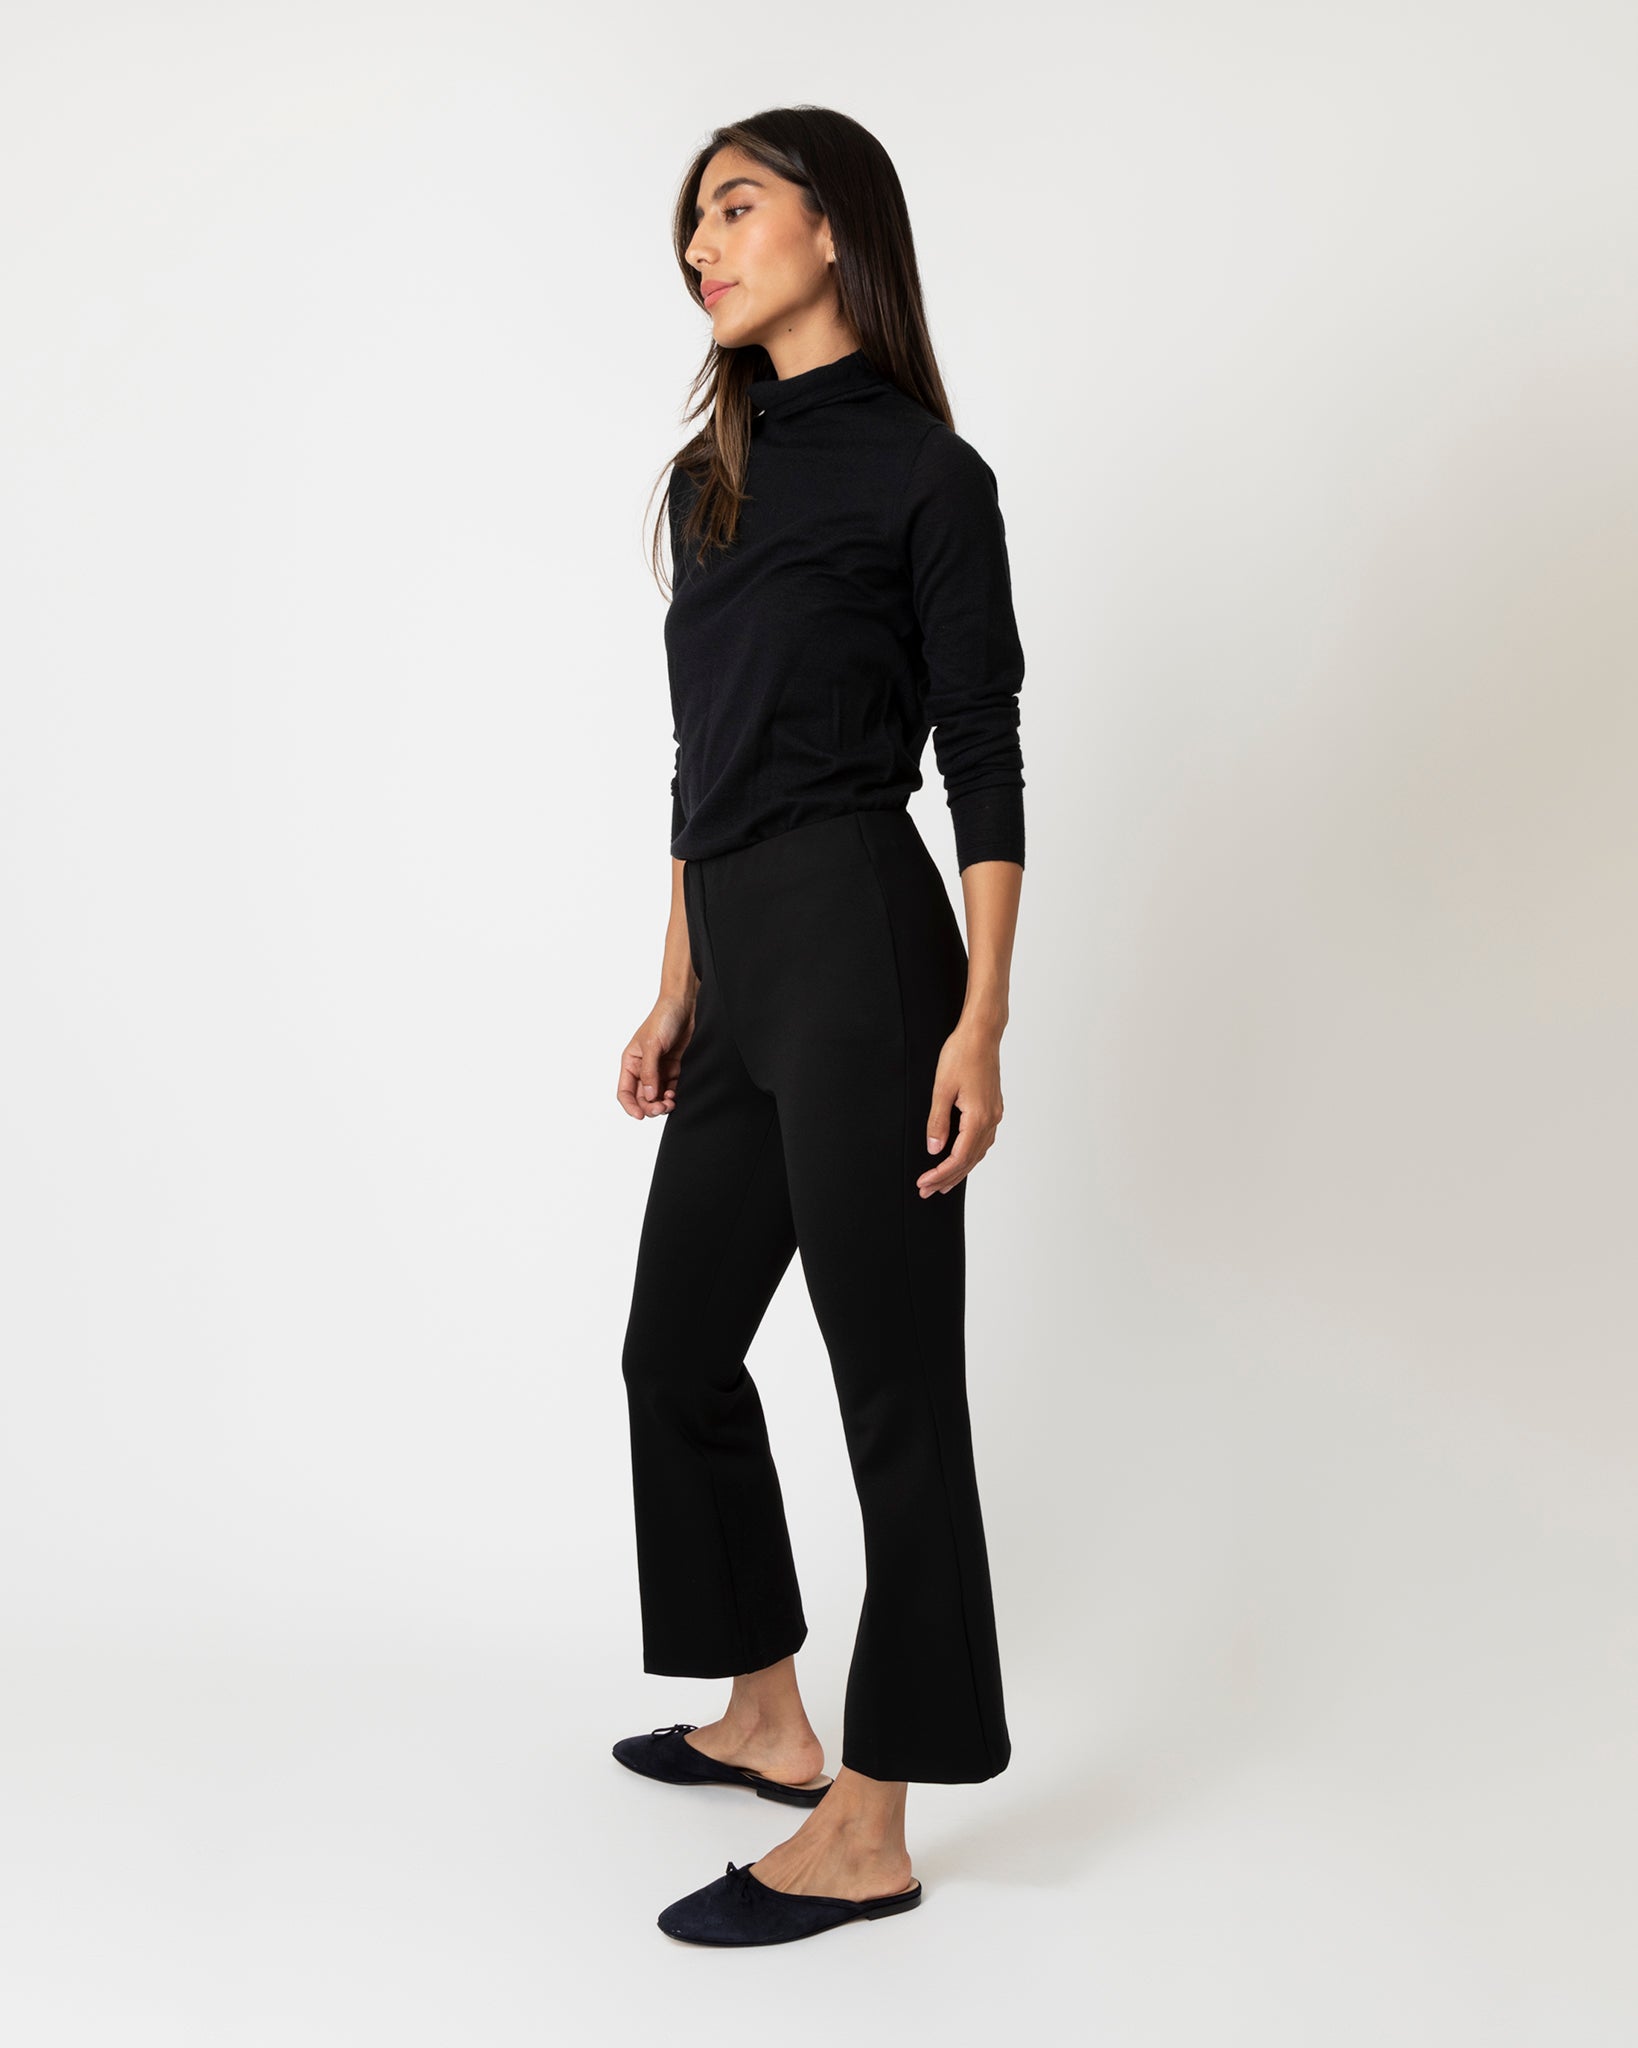 Prince Cropped Flare Leg Pant in navy by Ecru  SaVvy  Retail Therapy